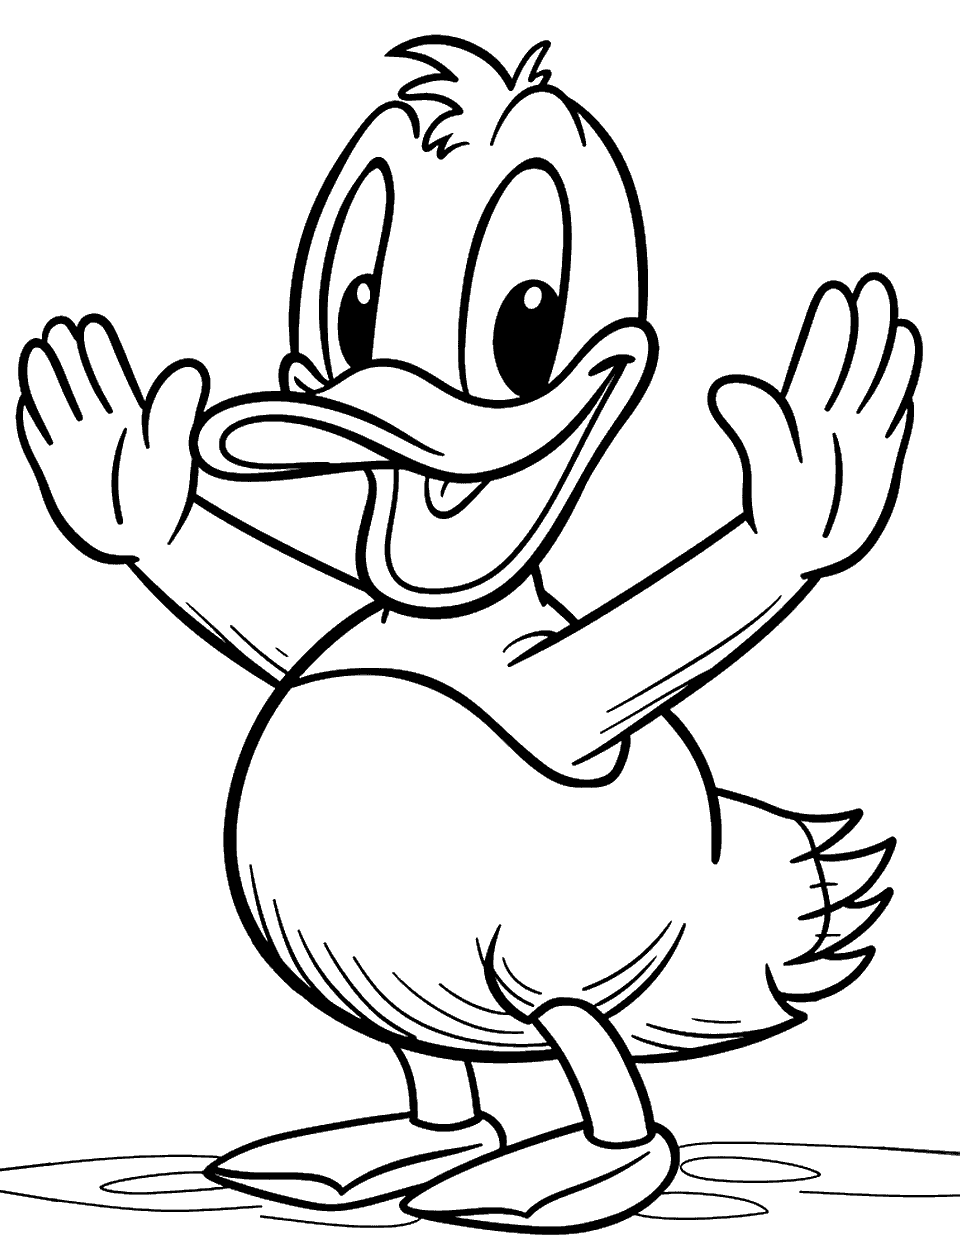 Donald Duck Waving Hello Coloring Page - Donald Duck standing up, waving hello with a big smile on his face.